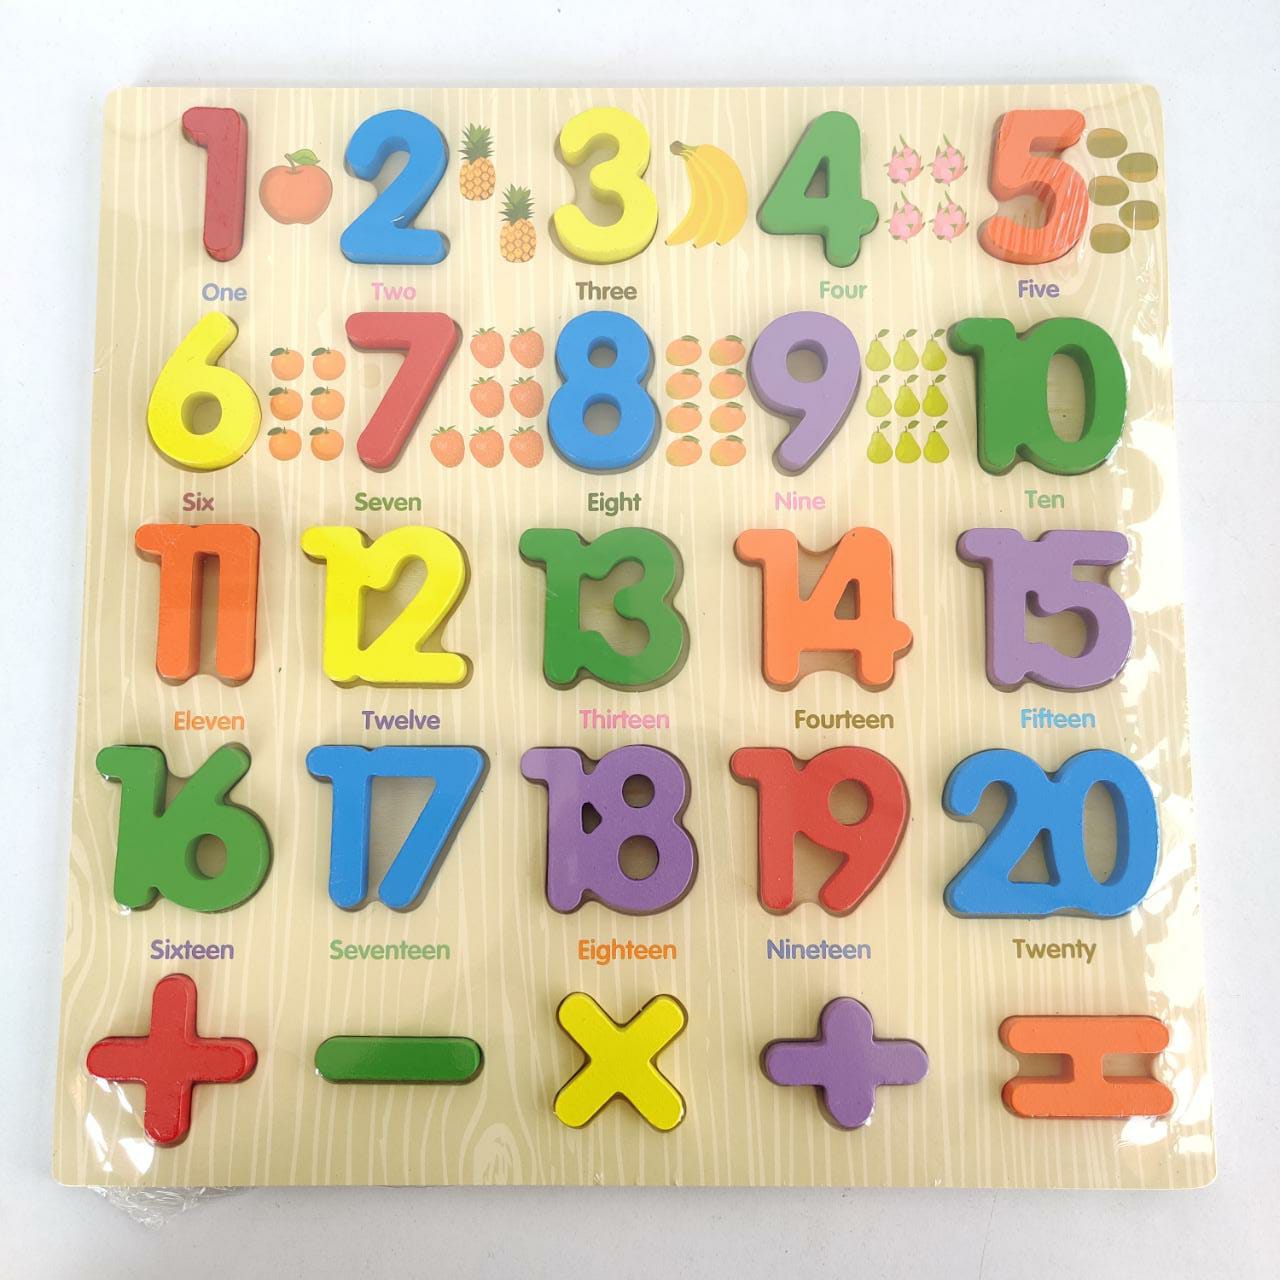 Wooden Logarithmic Board Puzzle Fishing Alpha Numeric Magnetic Matching  Busy Board Building Block Montessori Educational Toys